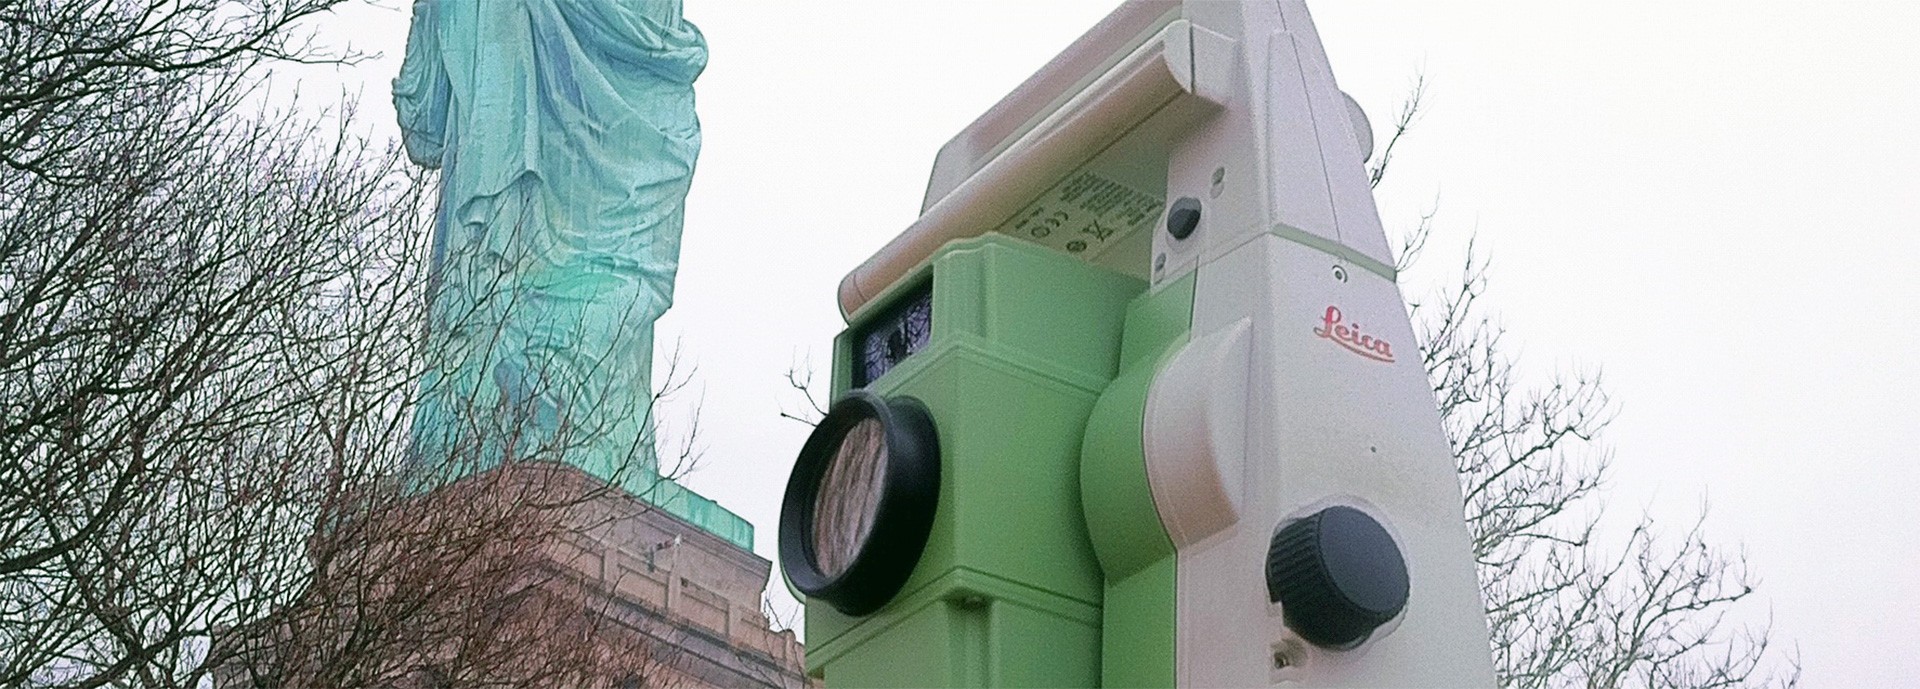 close up of survey equipment in front of the statue of liberty